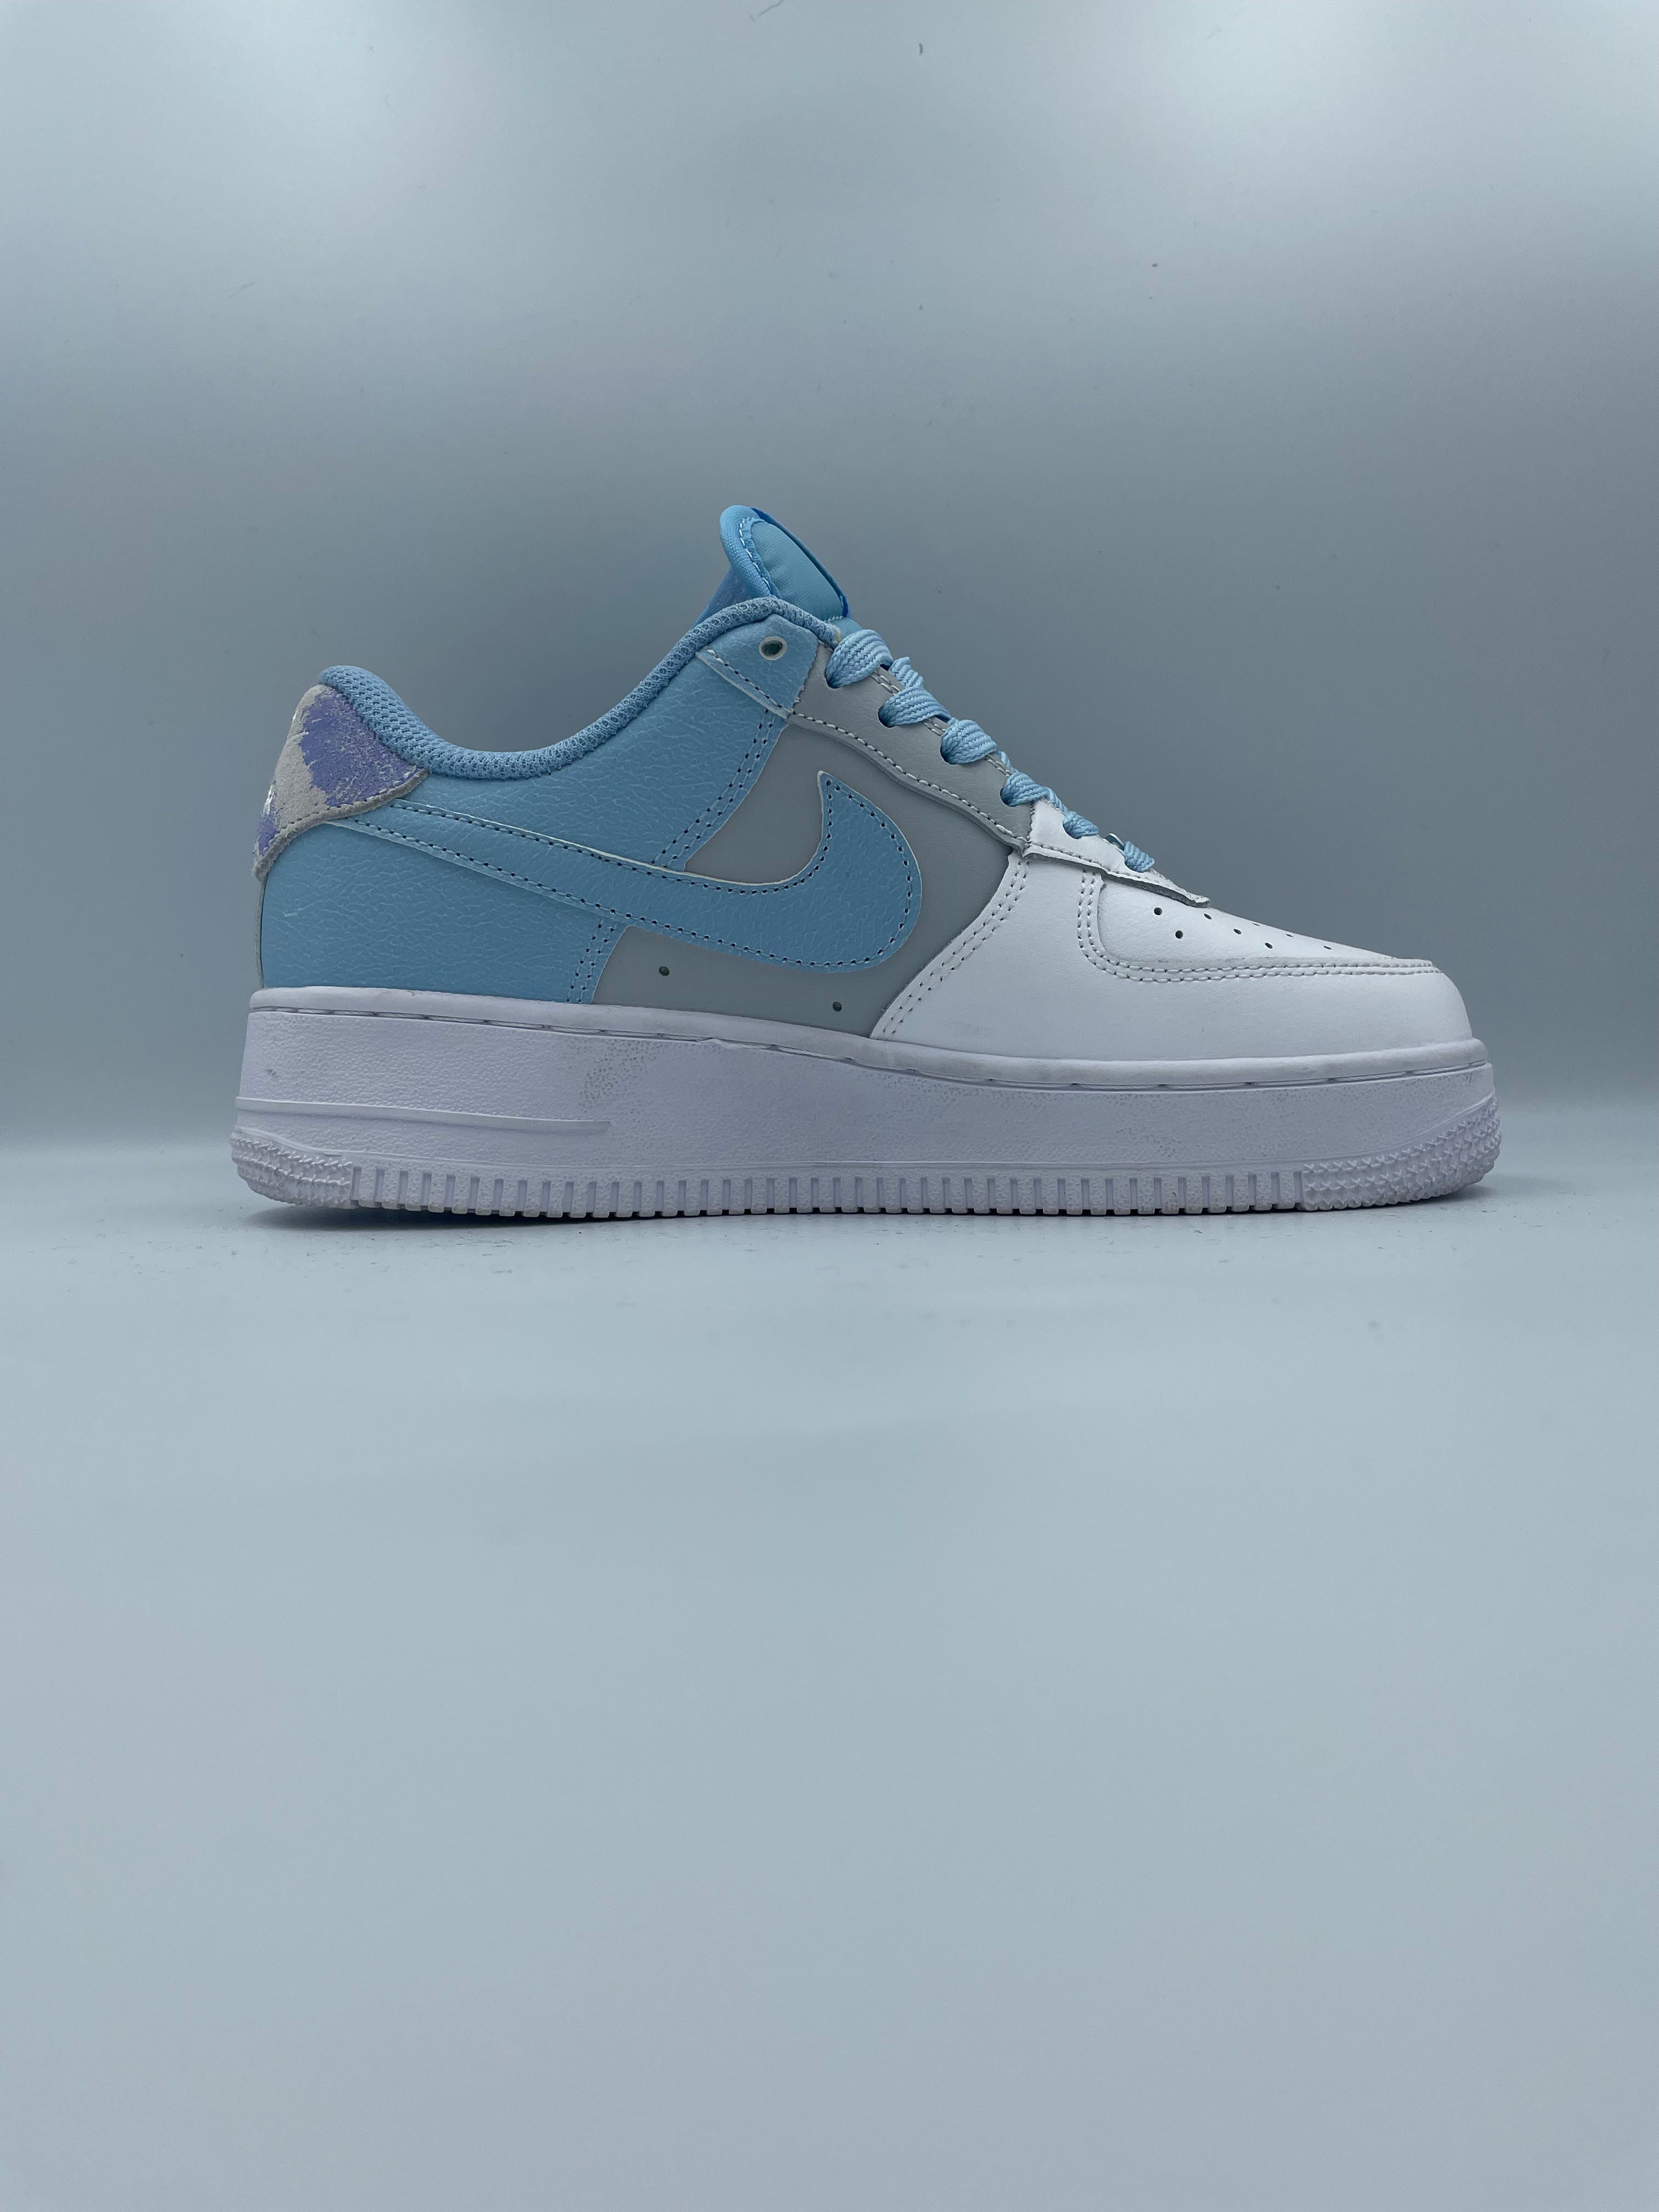 Nike Air Force 1 07 LV8 Psychic Blue Shoes